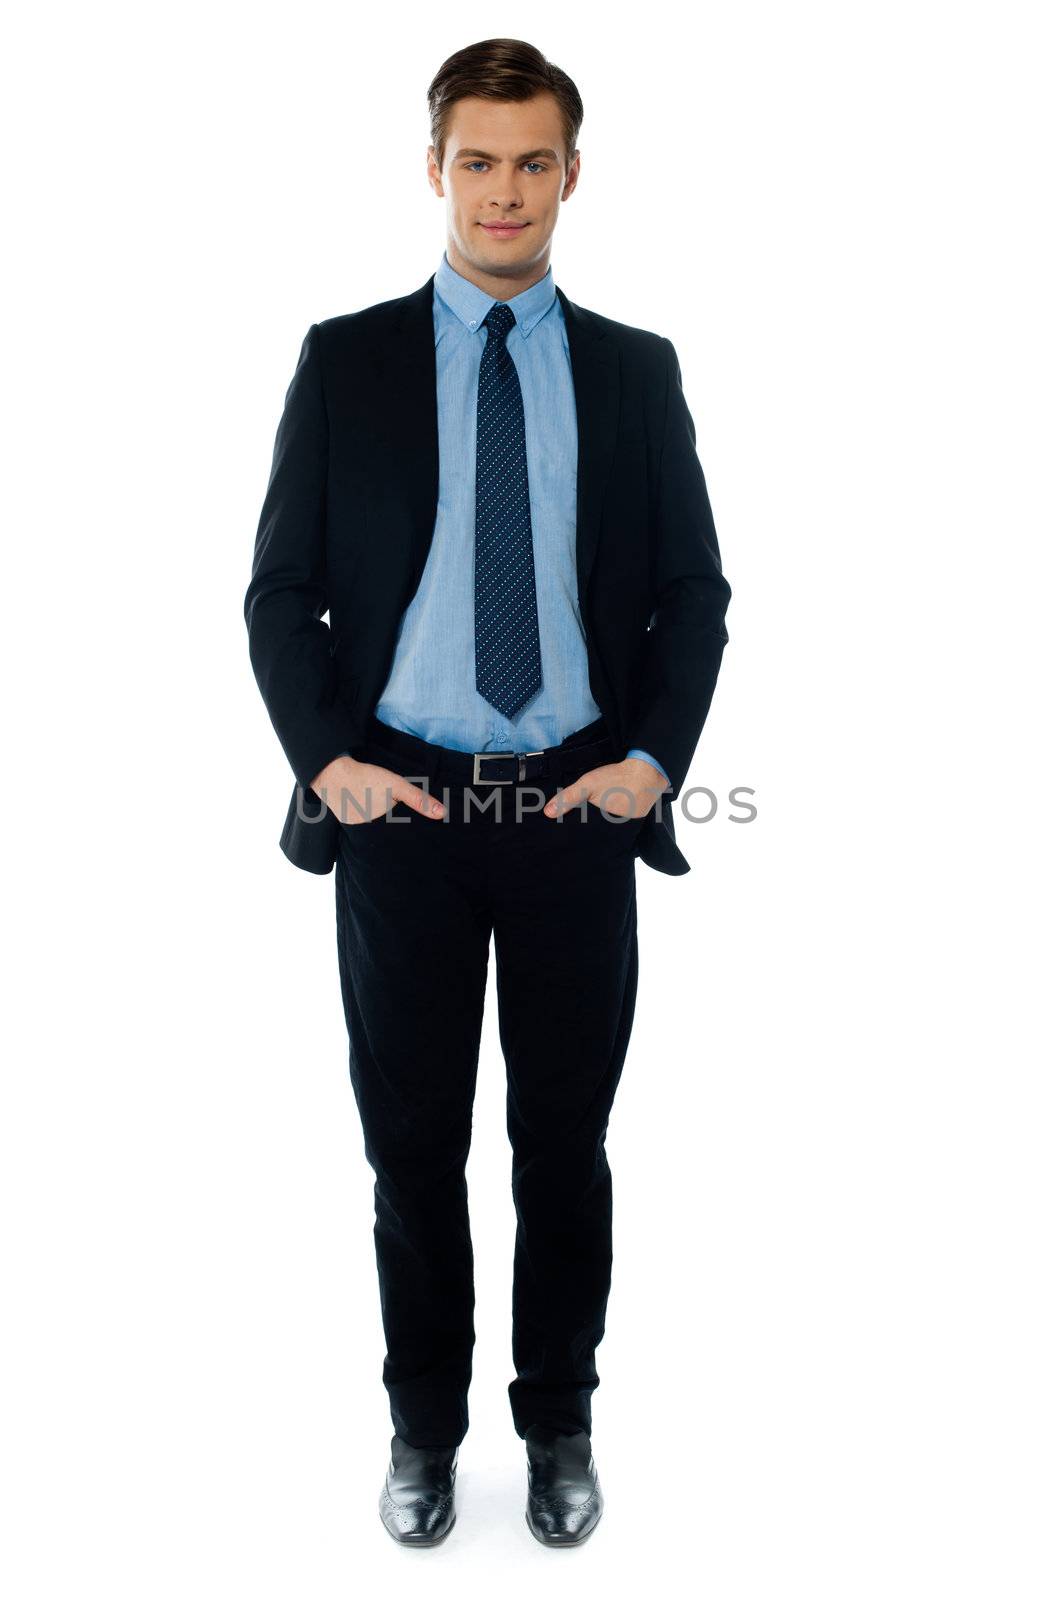 Businessman posing with hands in pocket on white background